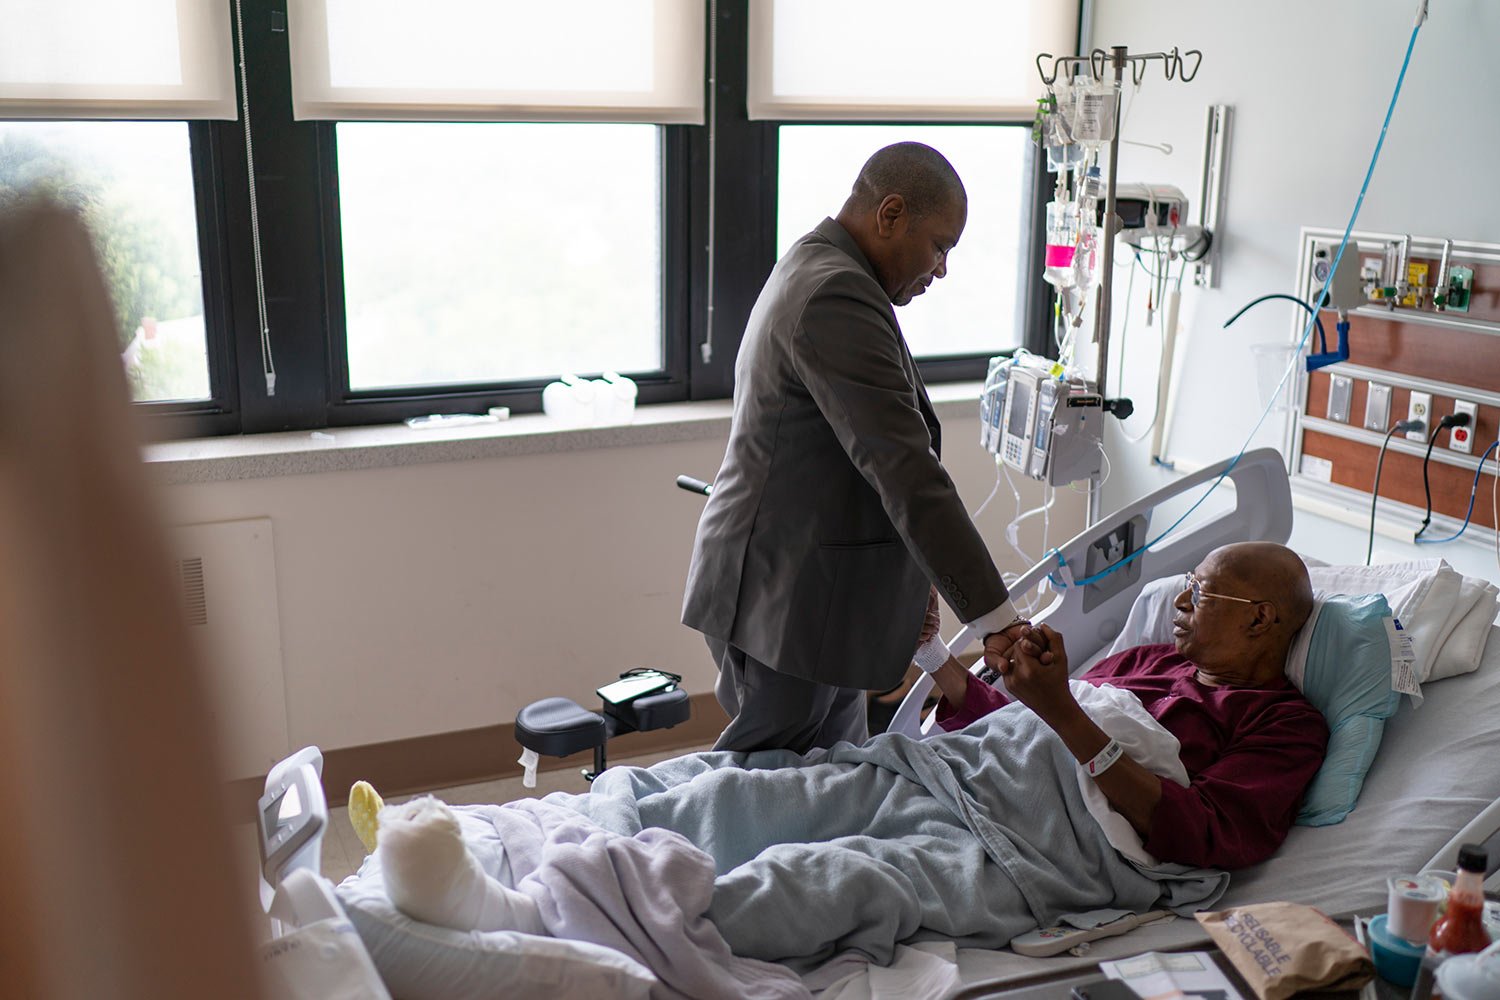  Rev. Jimmie Hardaway Jr., left, prays with, Rev. Charles Searcy, while visiting friends recovering in a hospital, Sunday, Aug. 20, 2023, in Buffalo, N.Y. (AP Photo/David Goldman)  